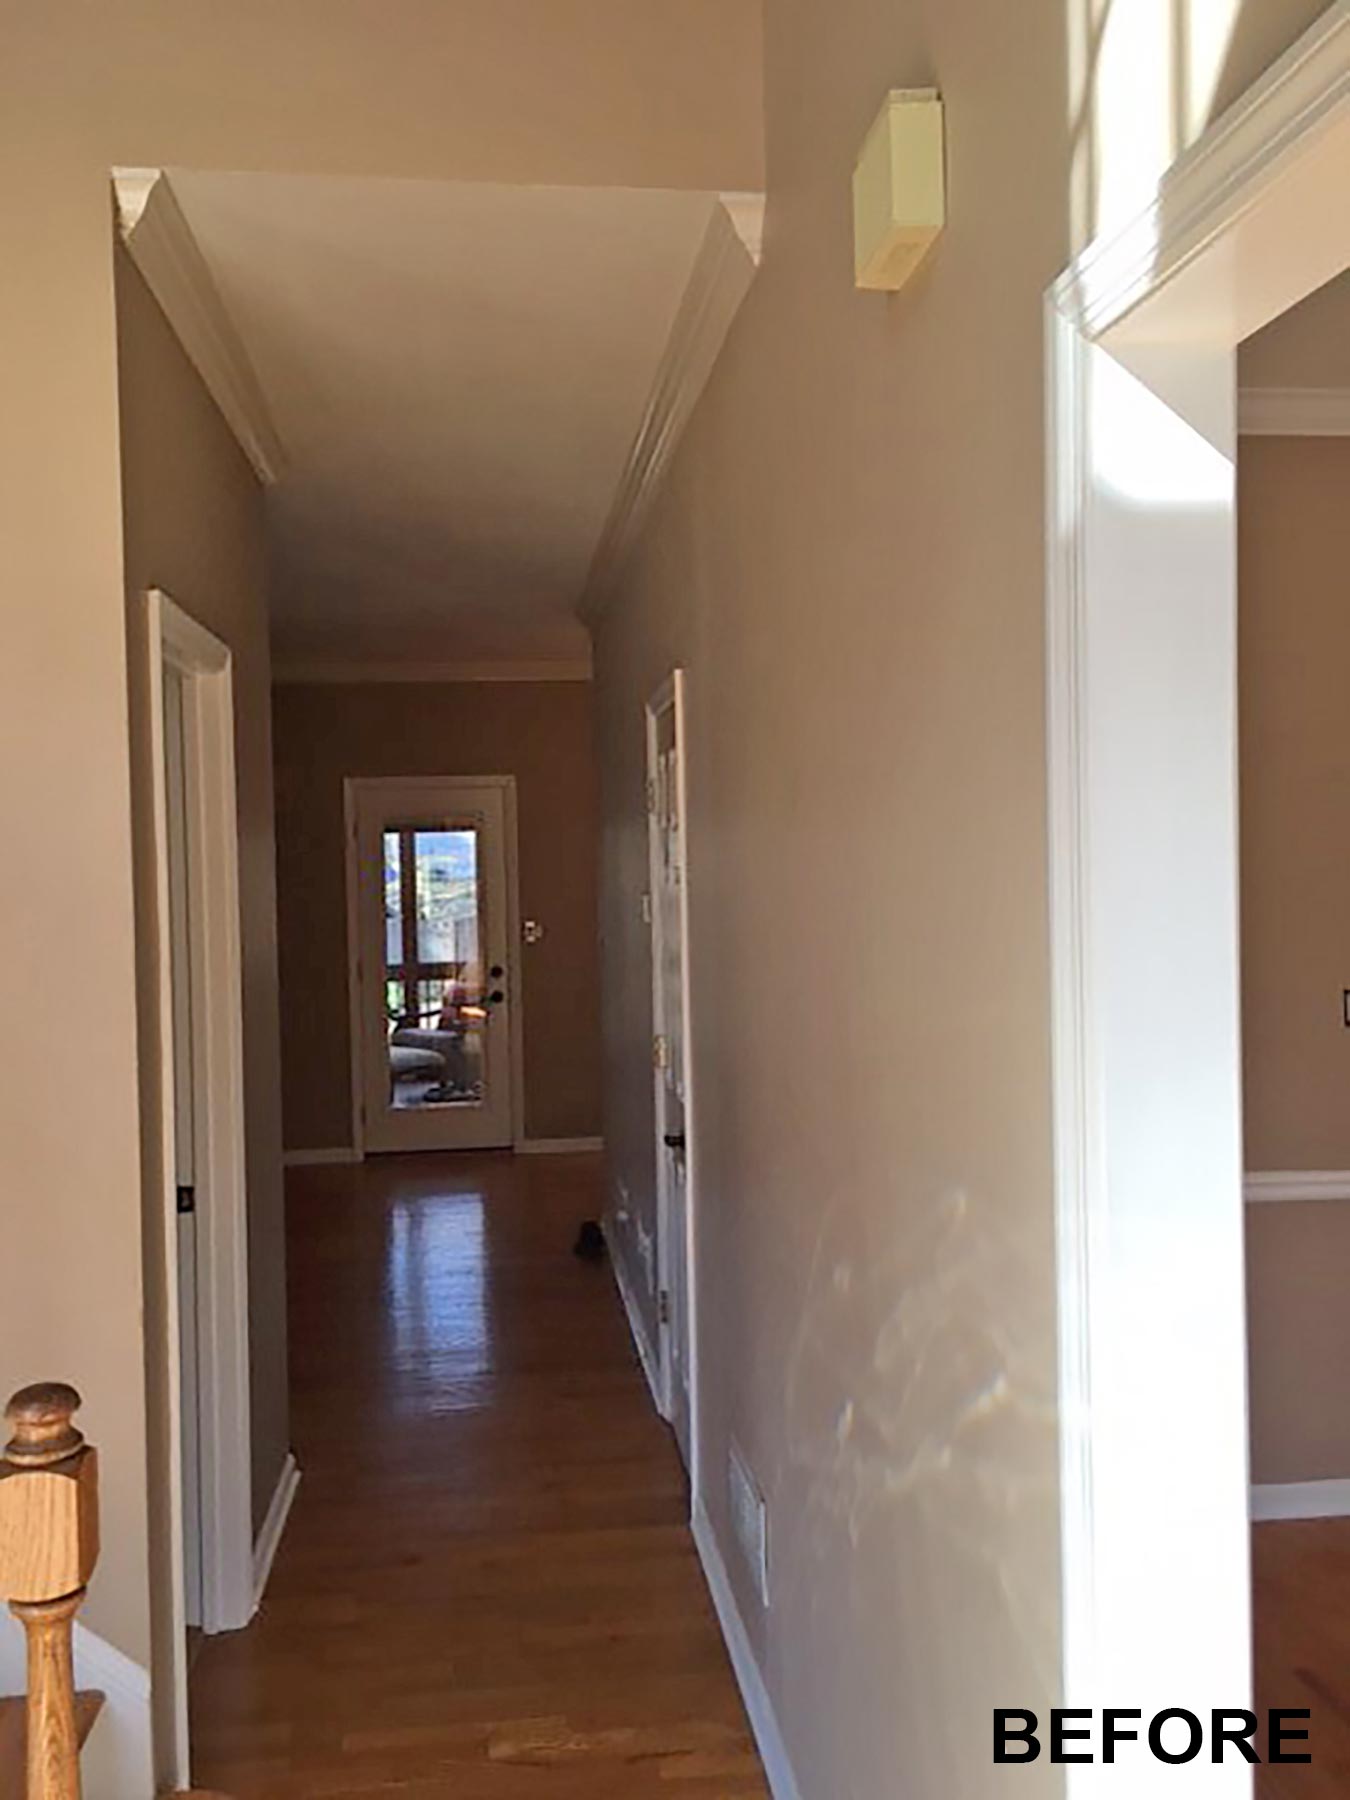 View down closed off hallway before remodeling